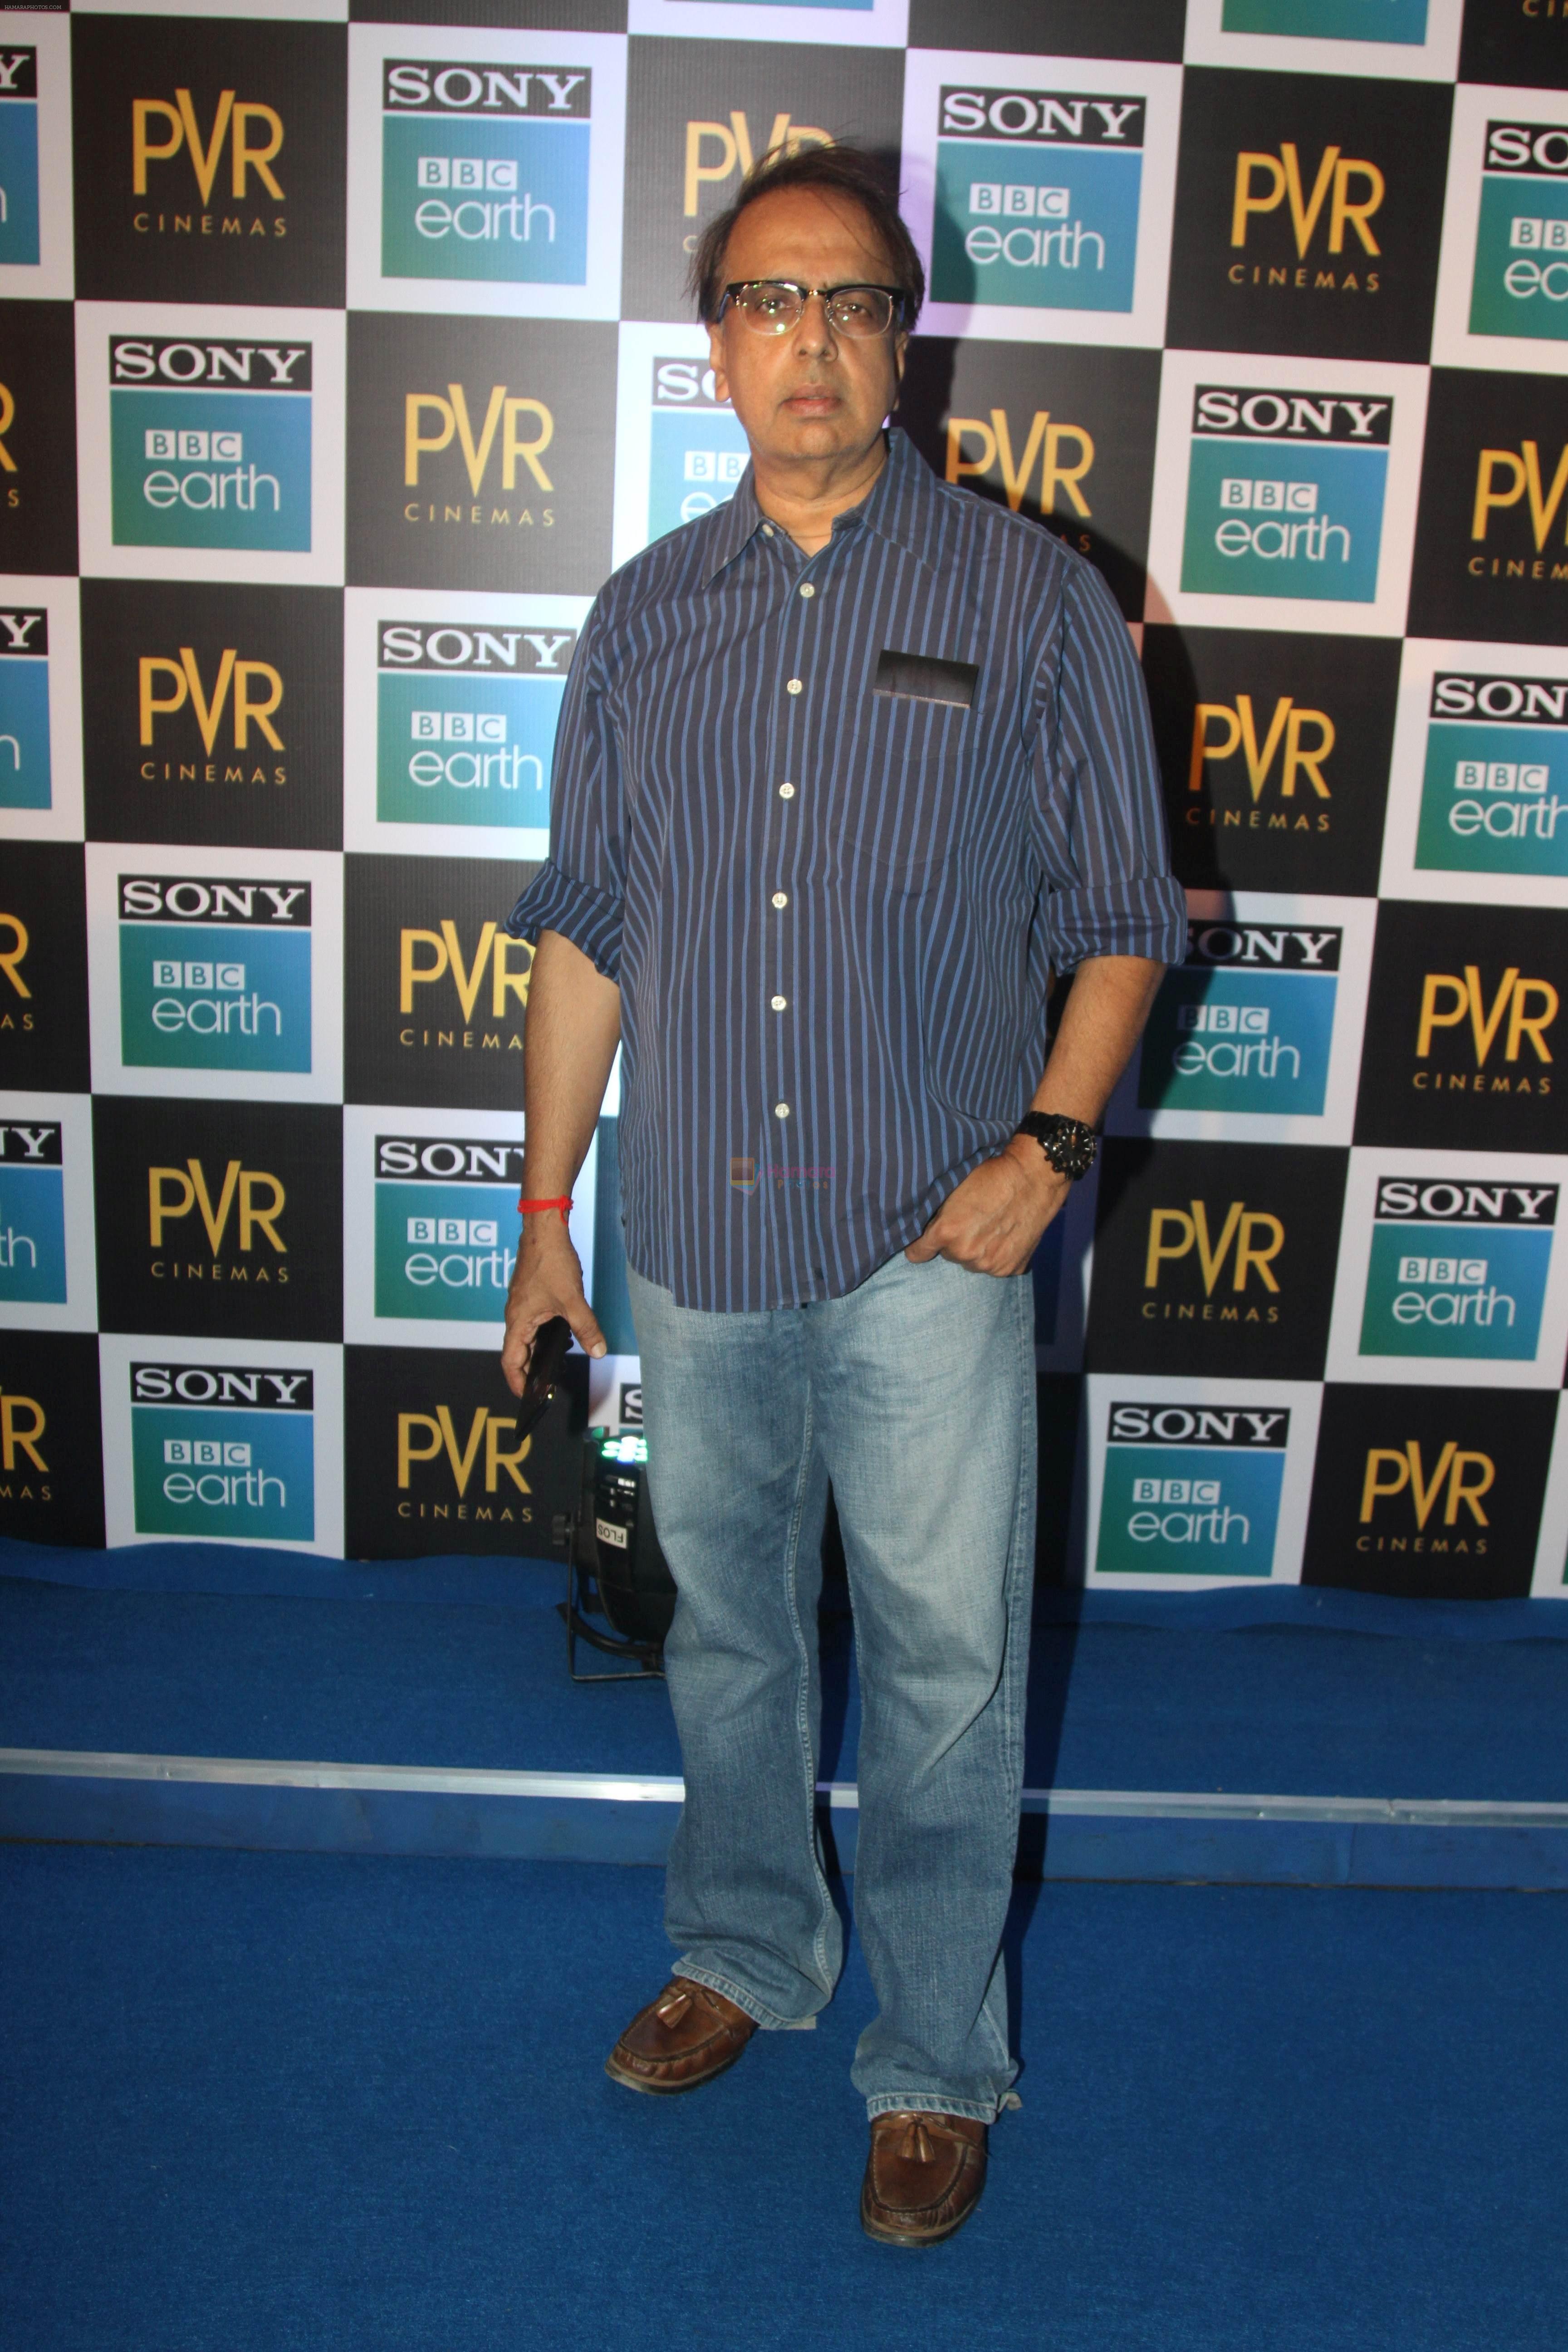 Anant Mahadevan at the Screening of Sony BBC Earth's film Blue Planet 2 at pvr icon in andheri on 15th May 2018